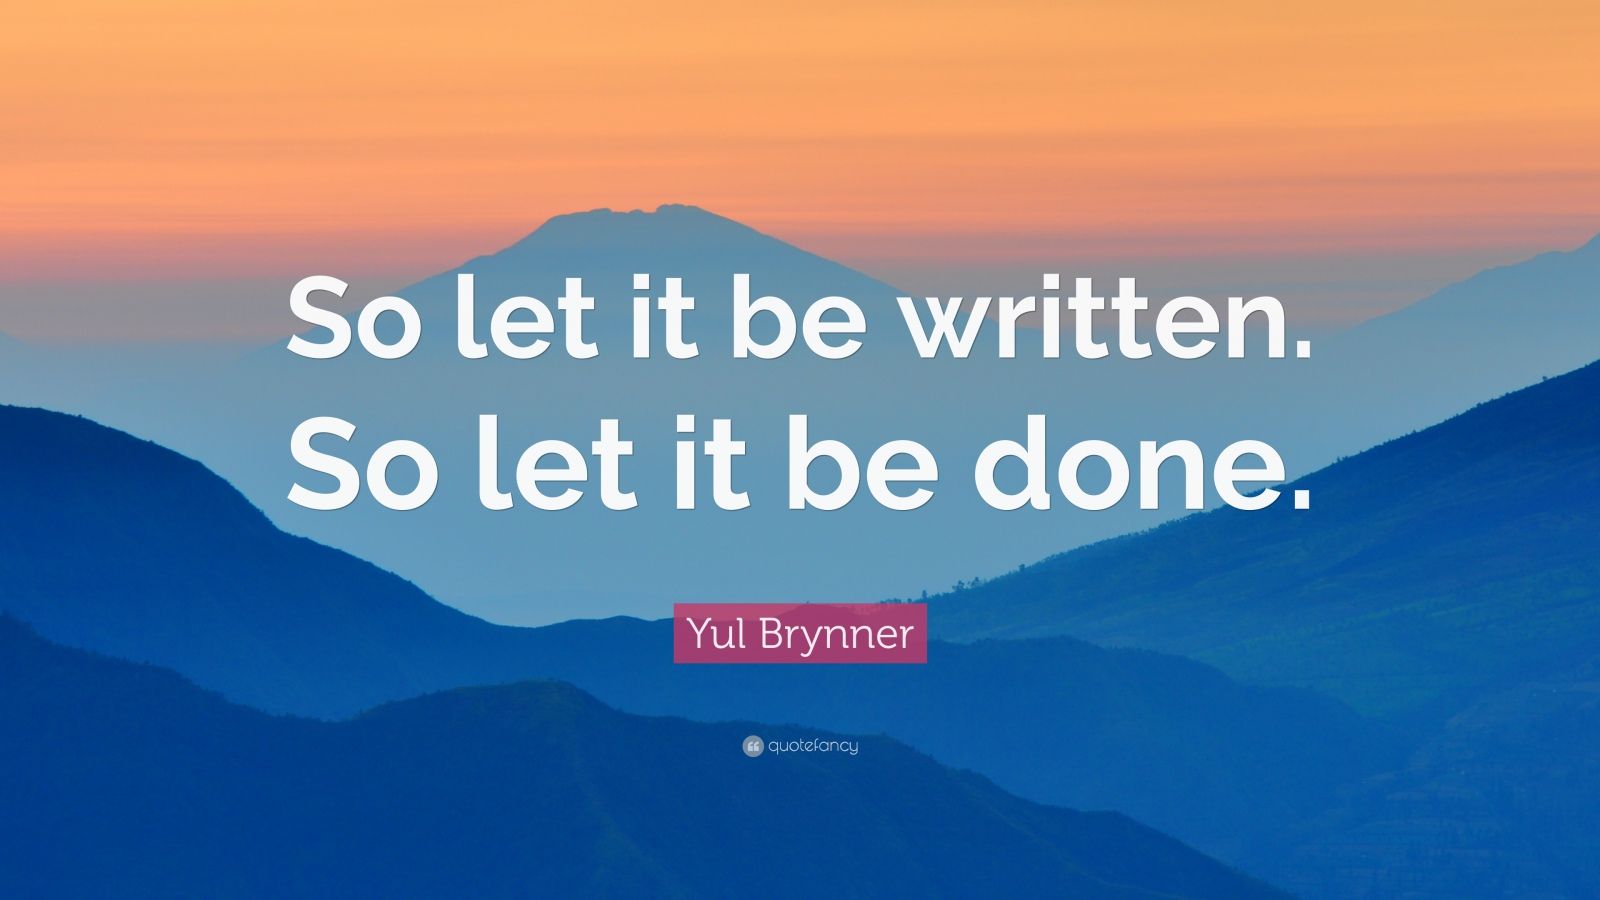 yul-brynner-quote-so-let-it-be-written-so-let-it-be-done